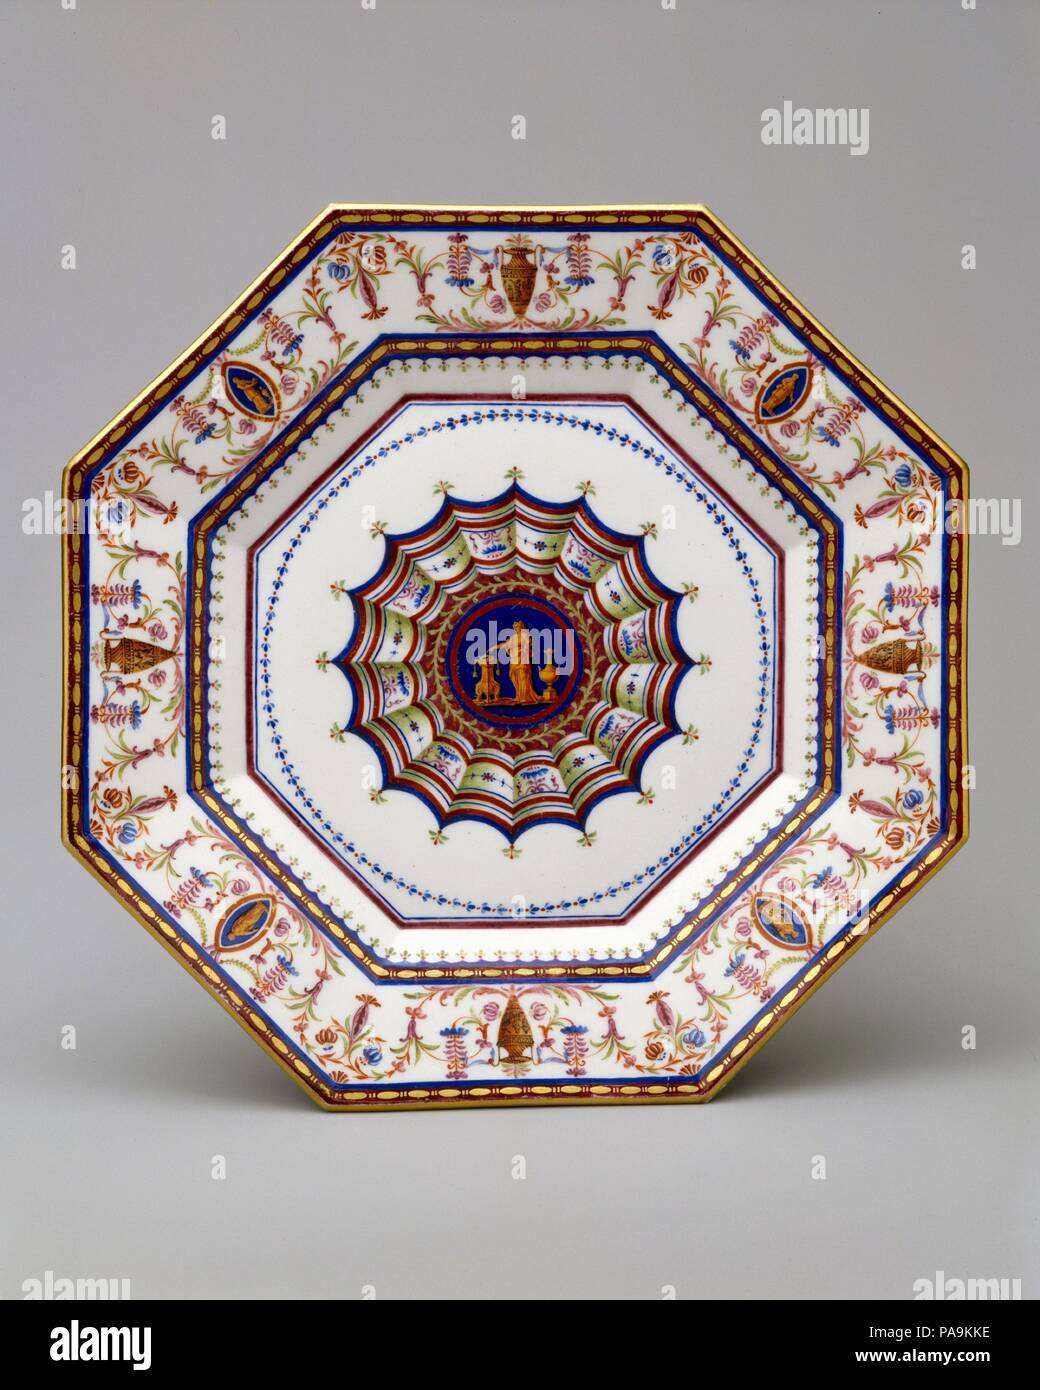 Plate (assiette octogone or assiette platte) from the "Service Arabesque".  Culture: French, Sèvres. Decorator: Jean Armand Fallot (French, active  1764-90). Designer: Louis Le Masson (French, 1743-1829). Dimensions:  Diameter: 9 3/8 in. (23.8